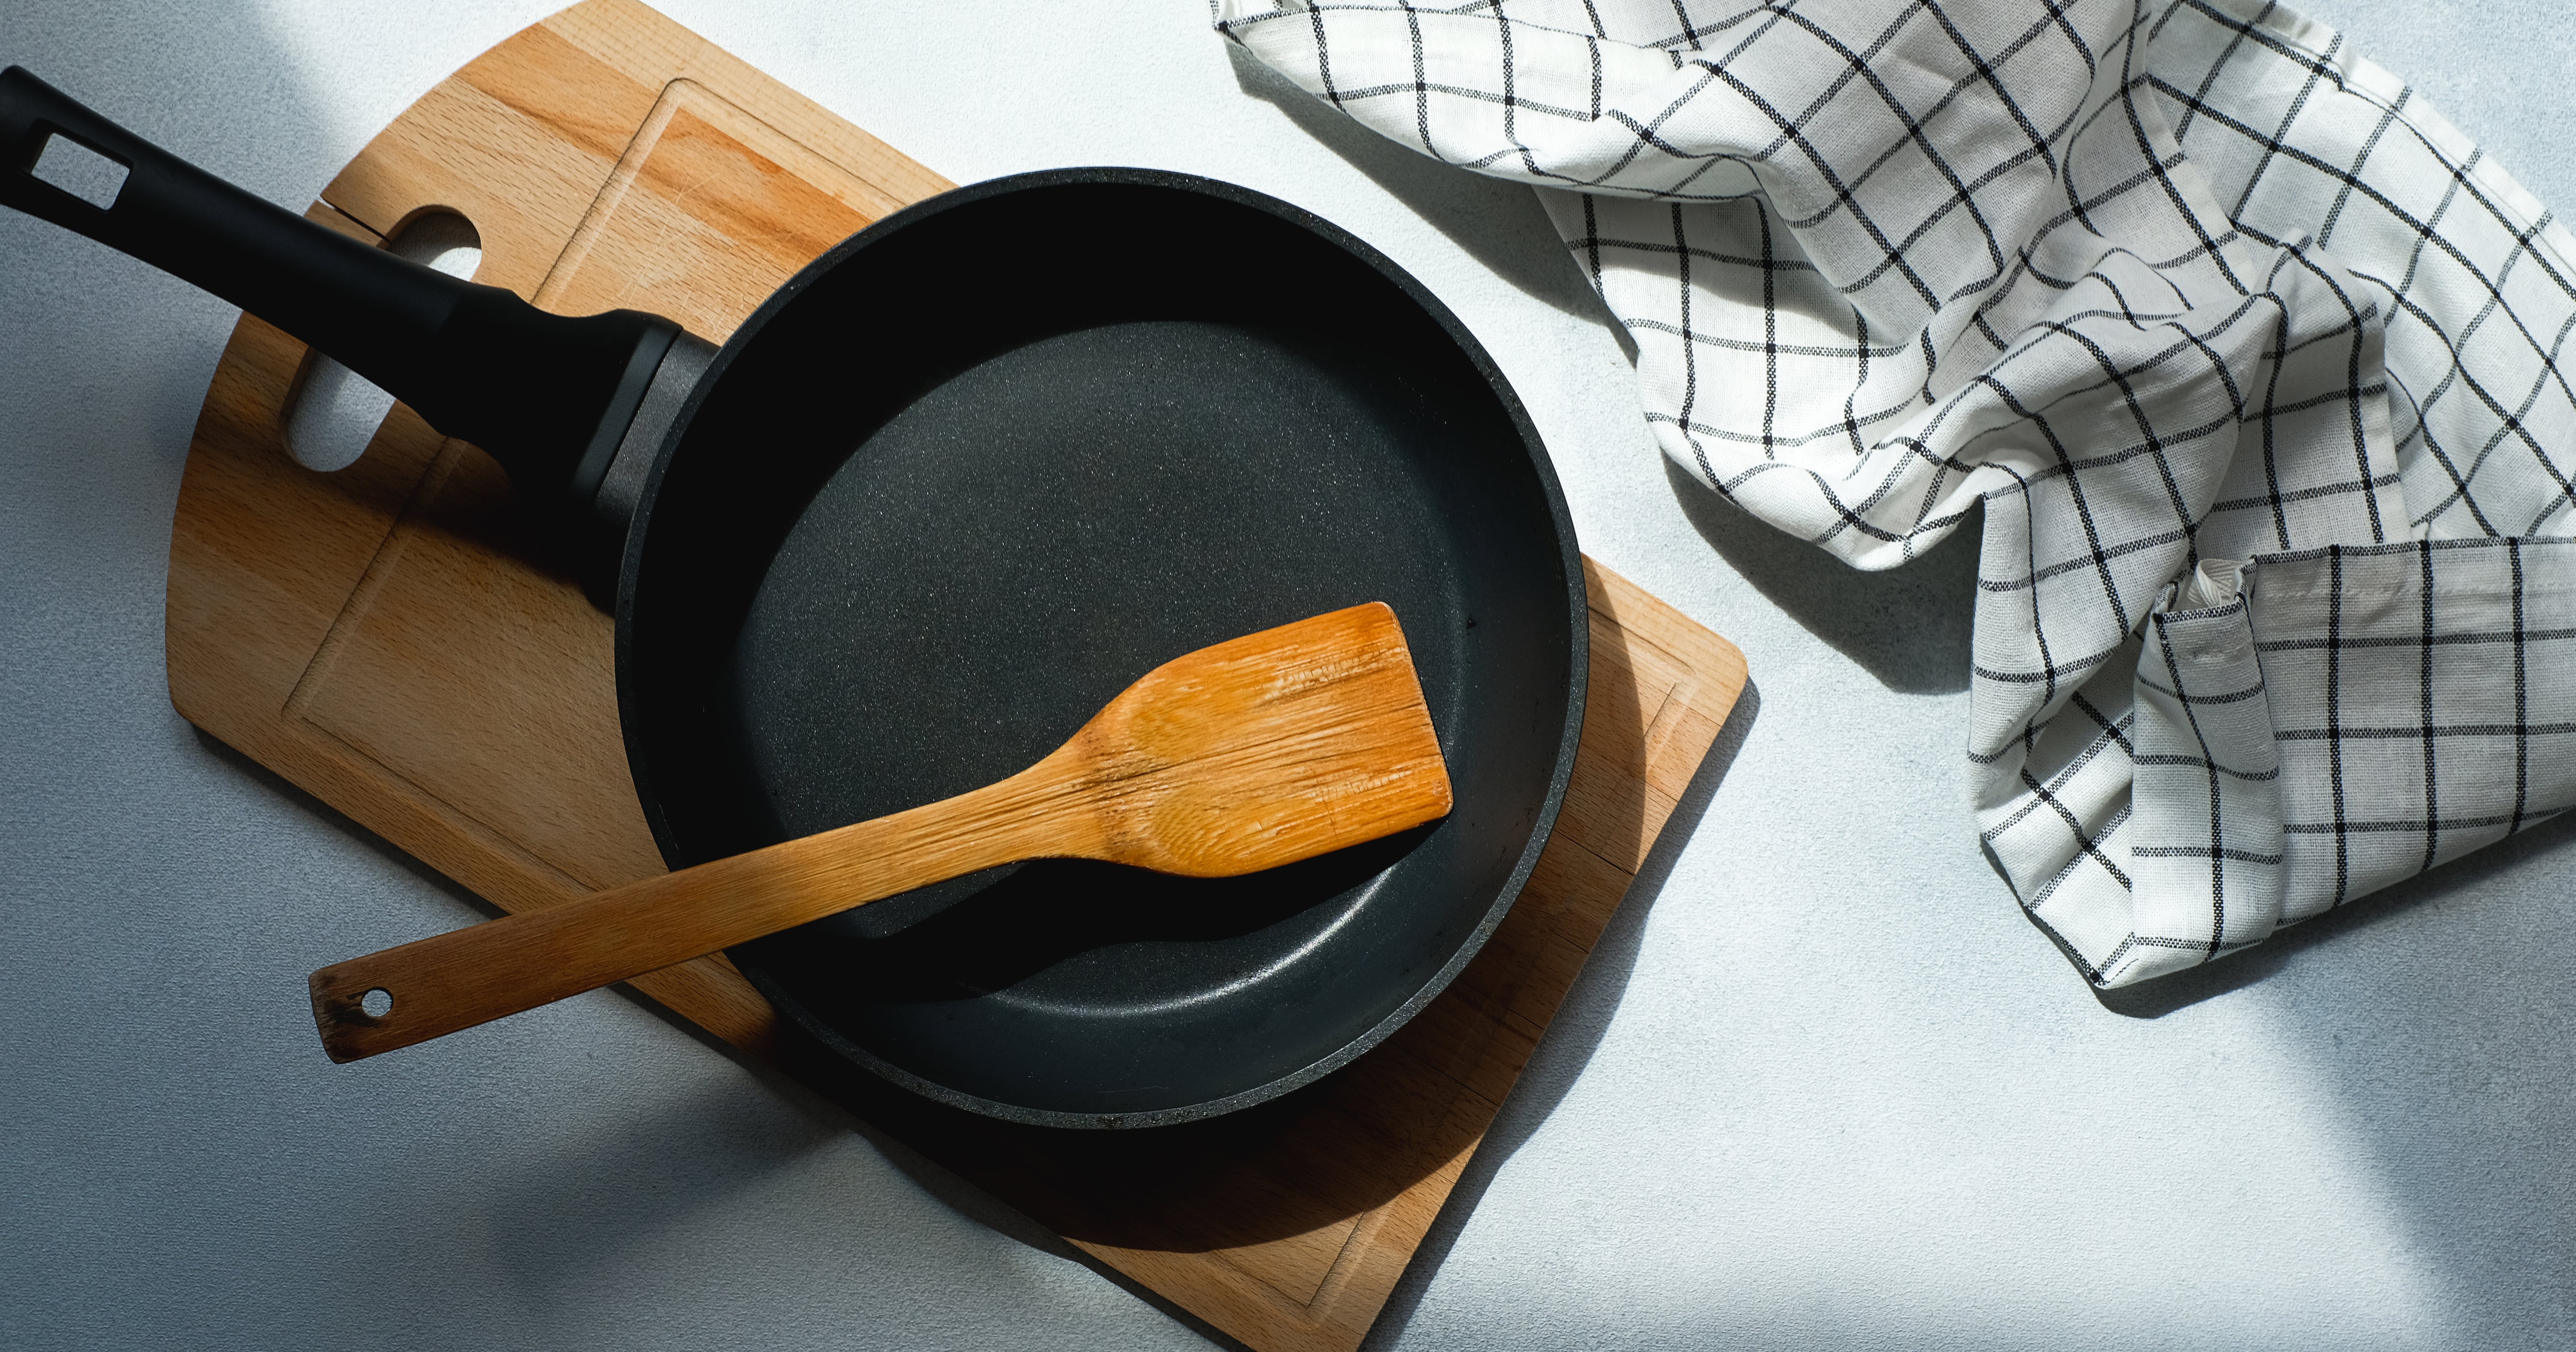 How to Clean a Cast Iron Skillet in 4 Easy Steps